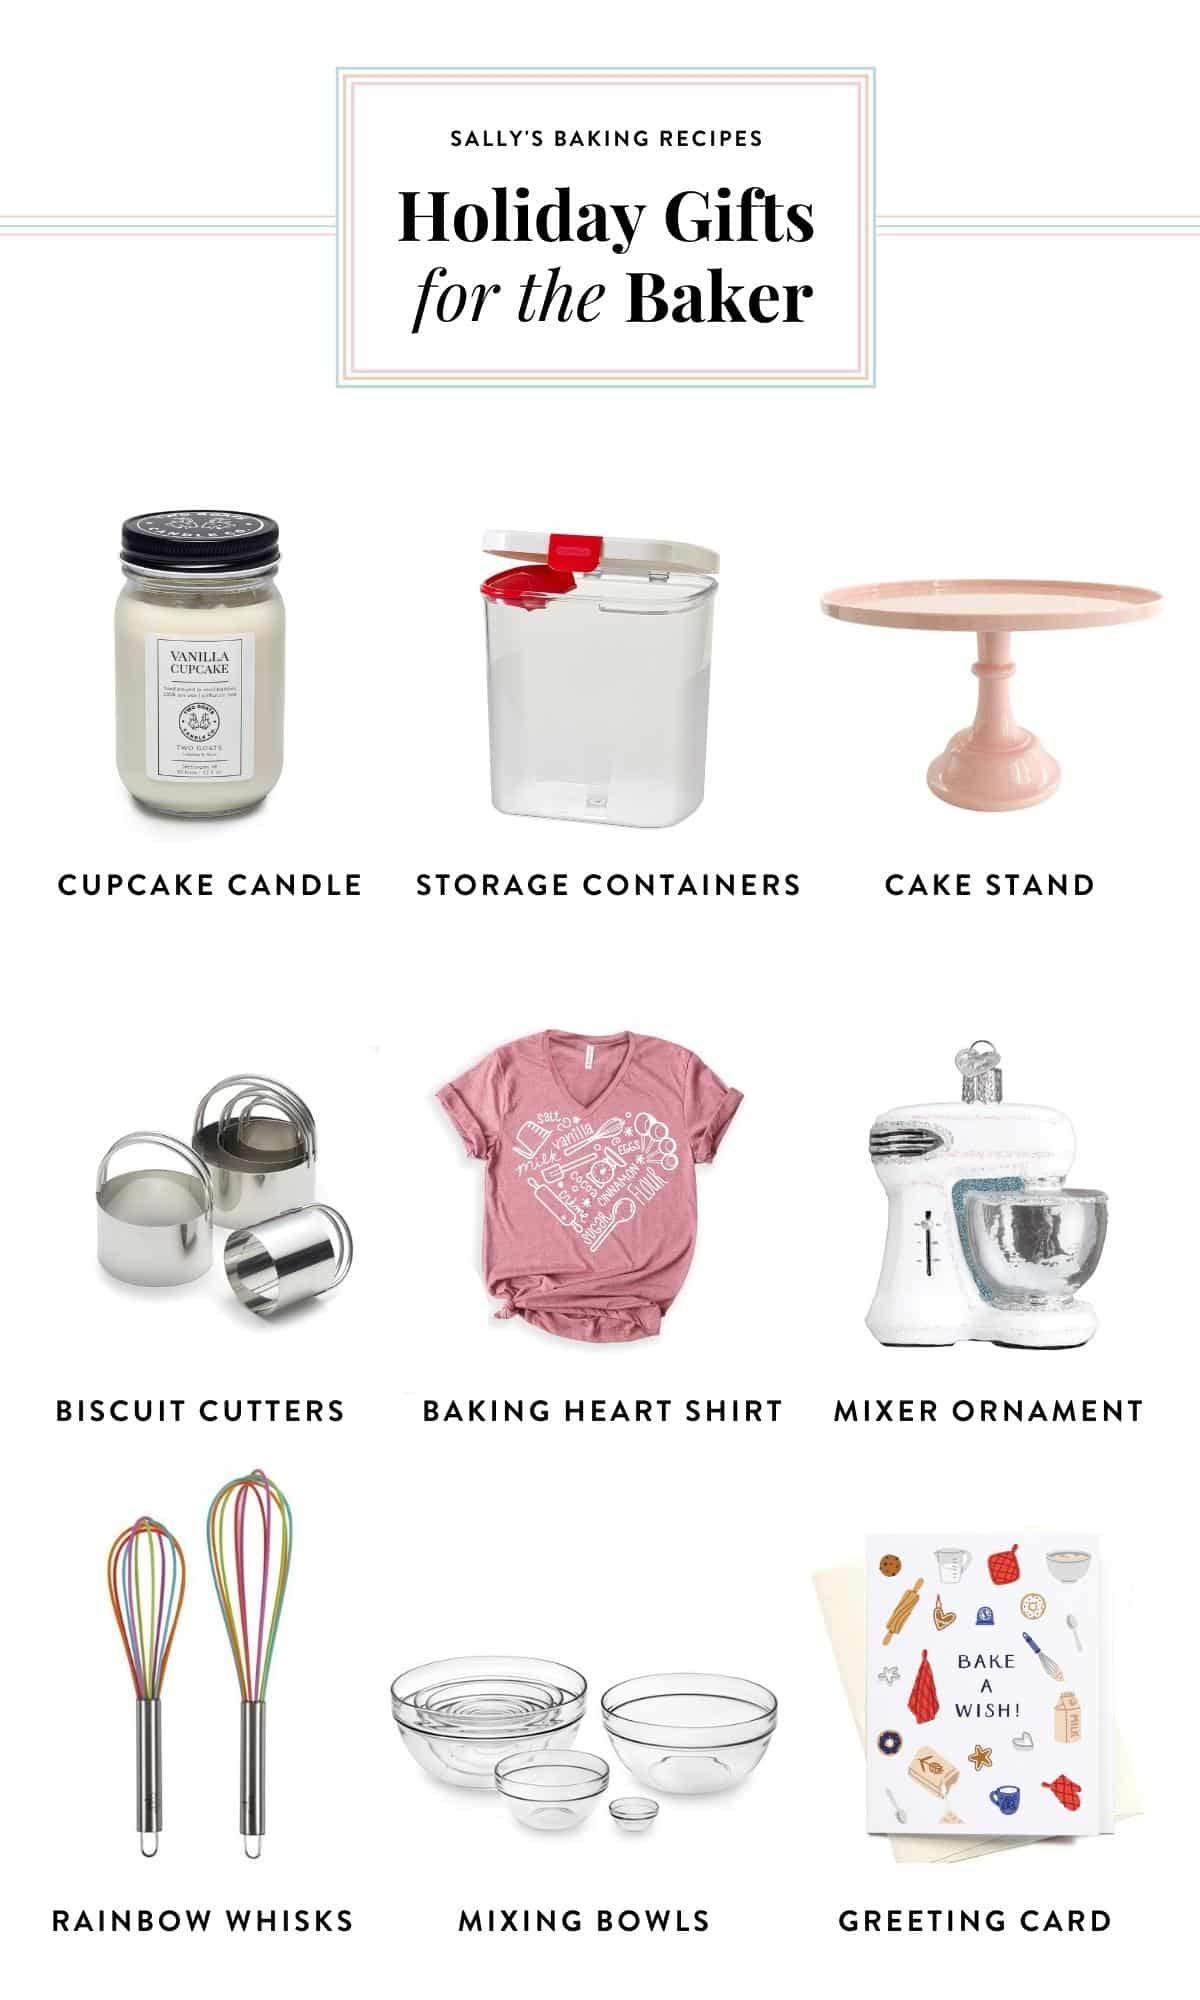 graphic displaying gift ideas for a baker including a candle, stand mixer ornament, pink cake stand, rainbow whisks, and more.